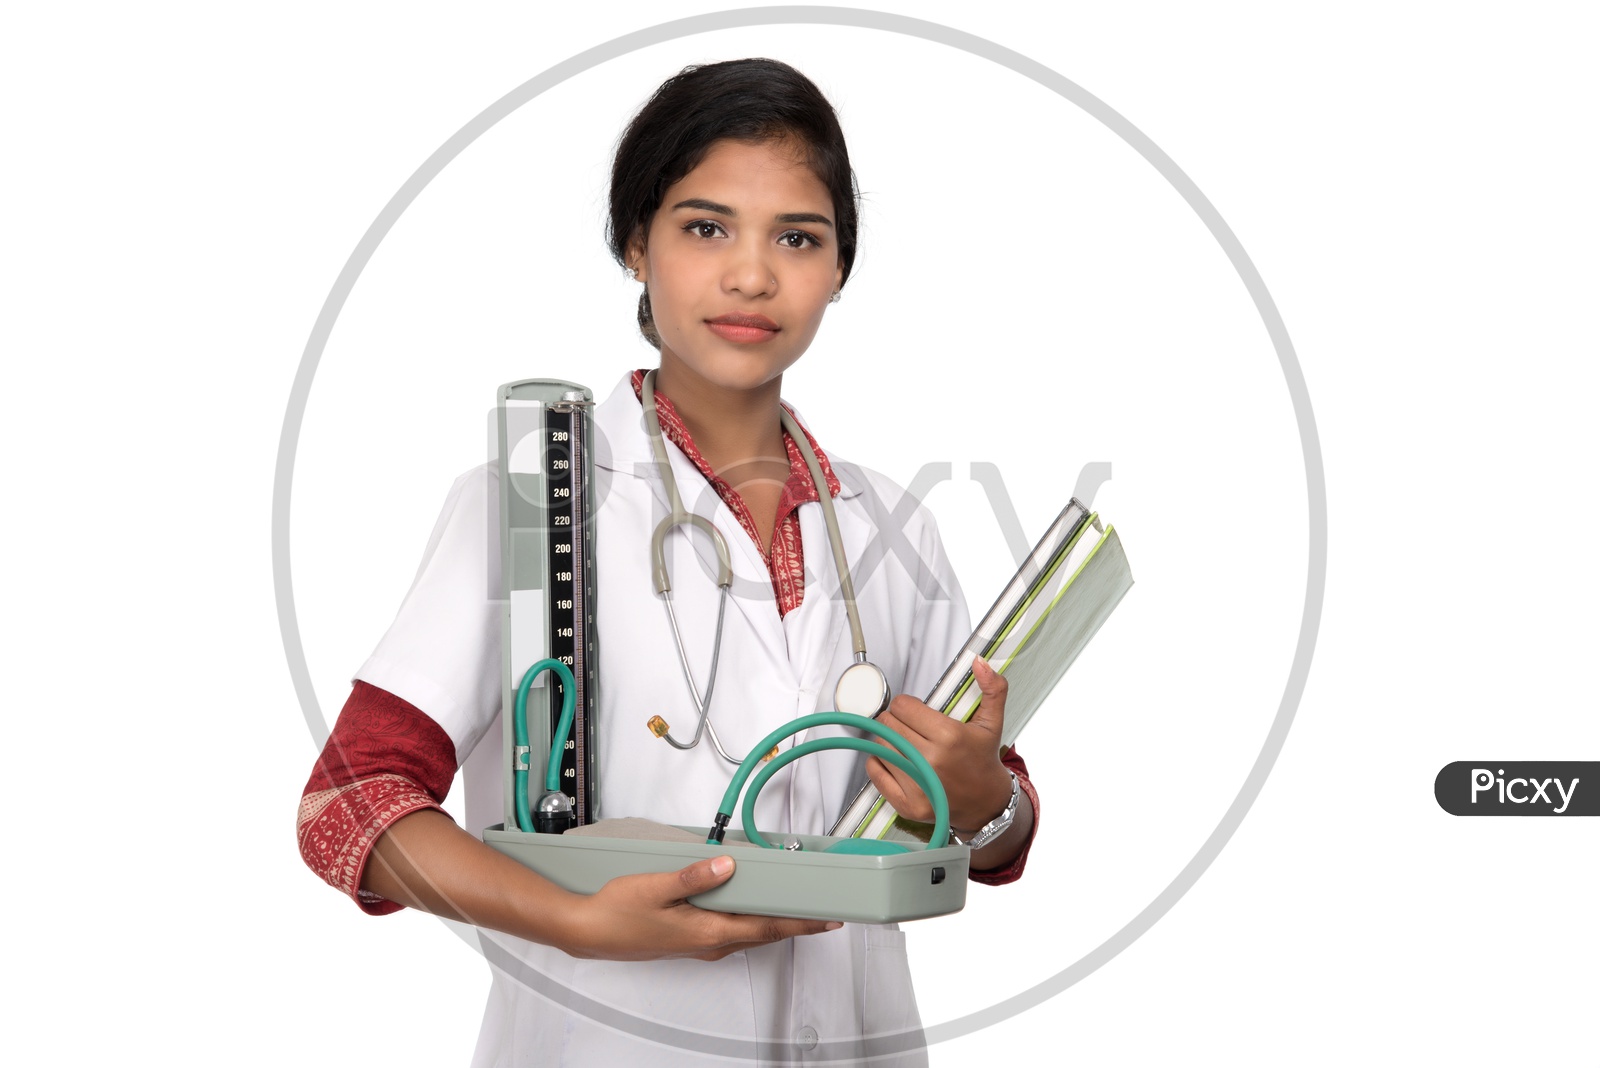 Young Lady Doctor With Blood Pressure Monitoring Gadget in Hand On an Isolated White Background